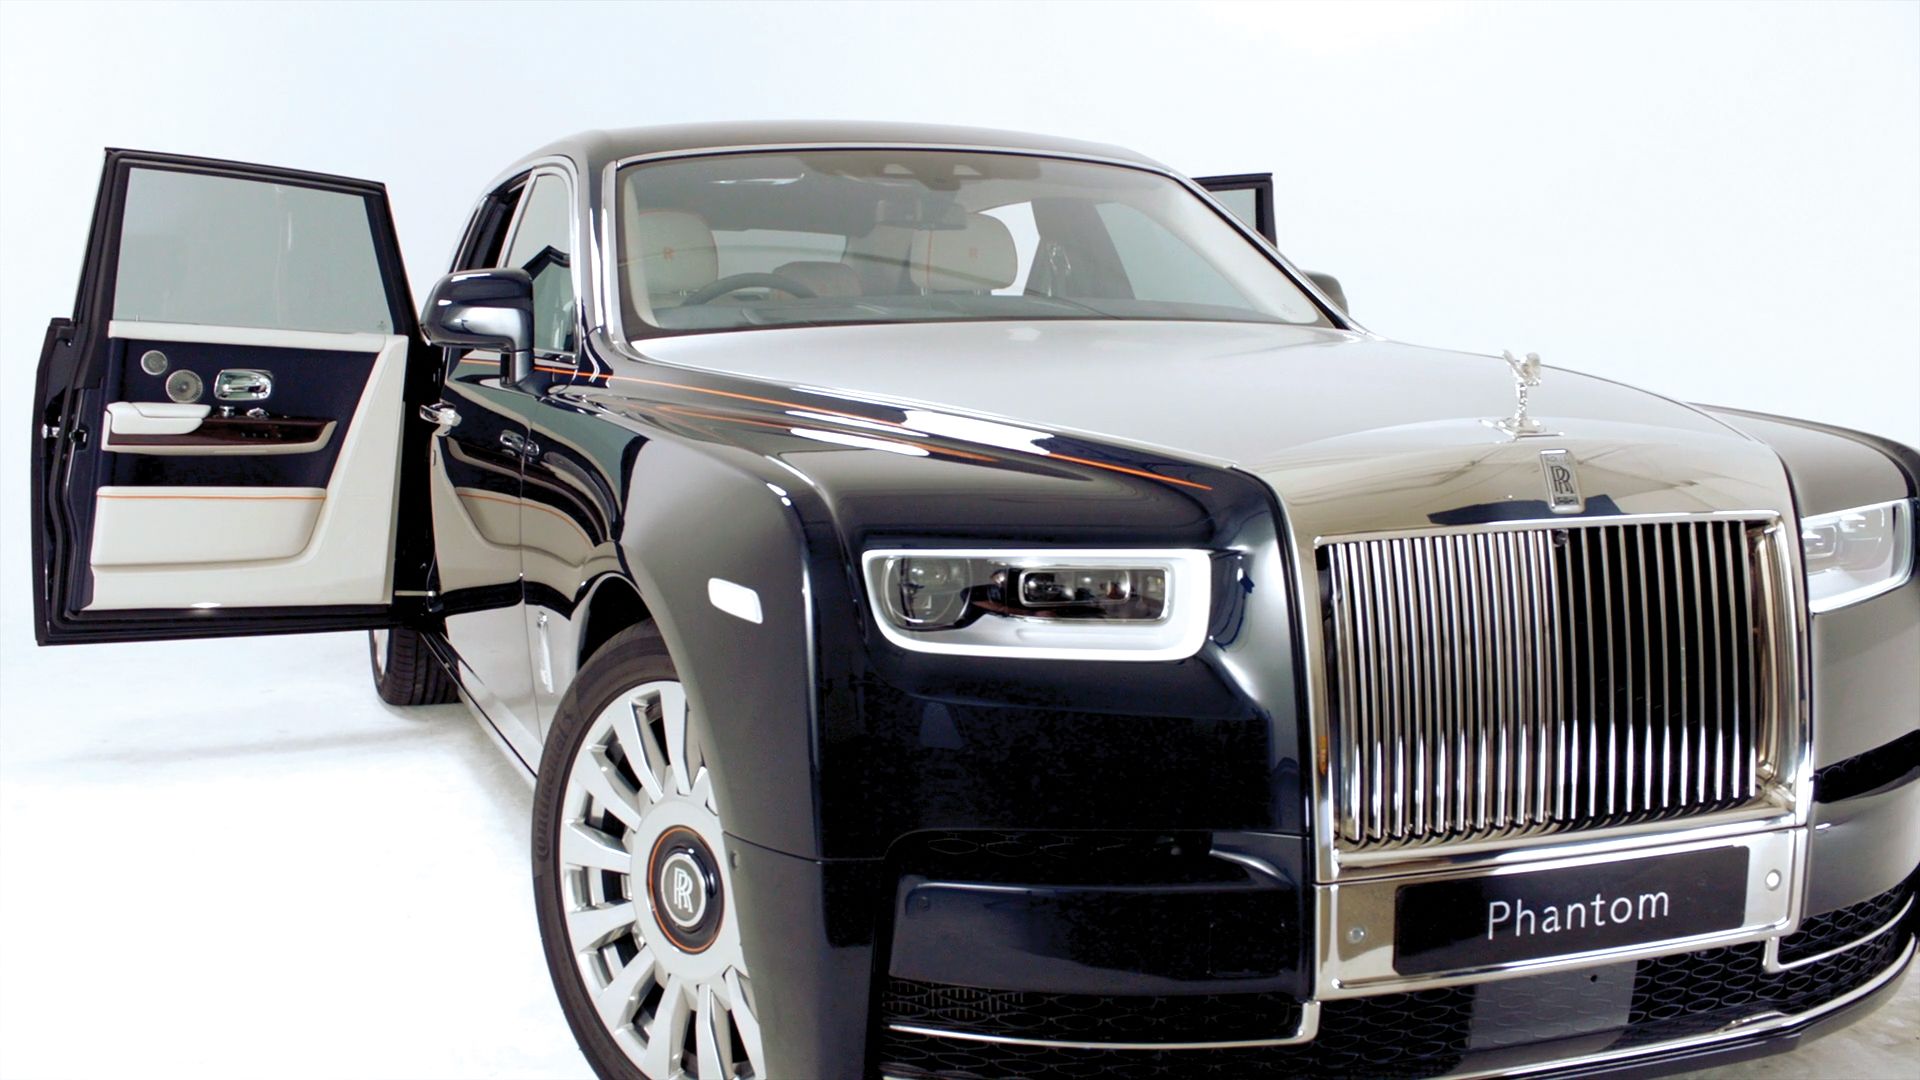 OUT OF THE SHADOWS OF GREATNESS 2020 ROLLS-ROYCE PHANTOM